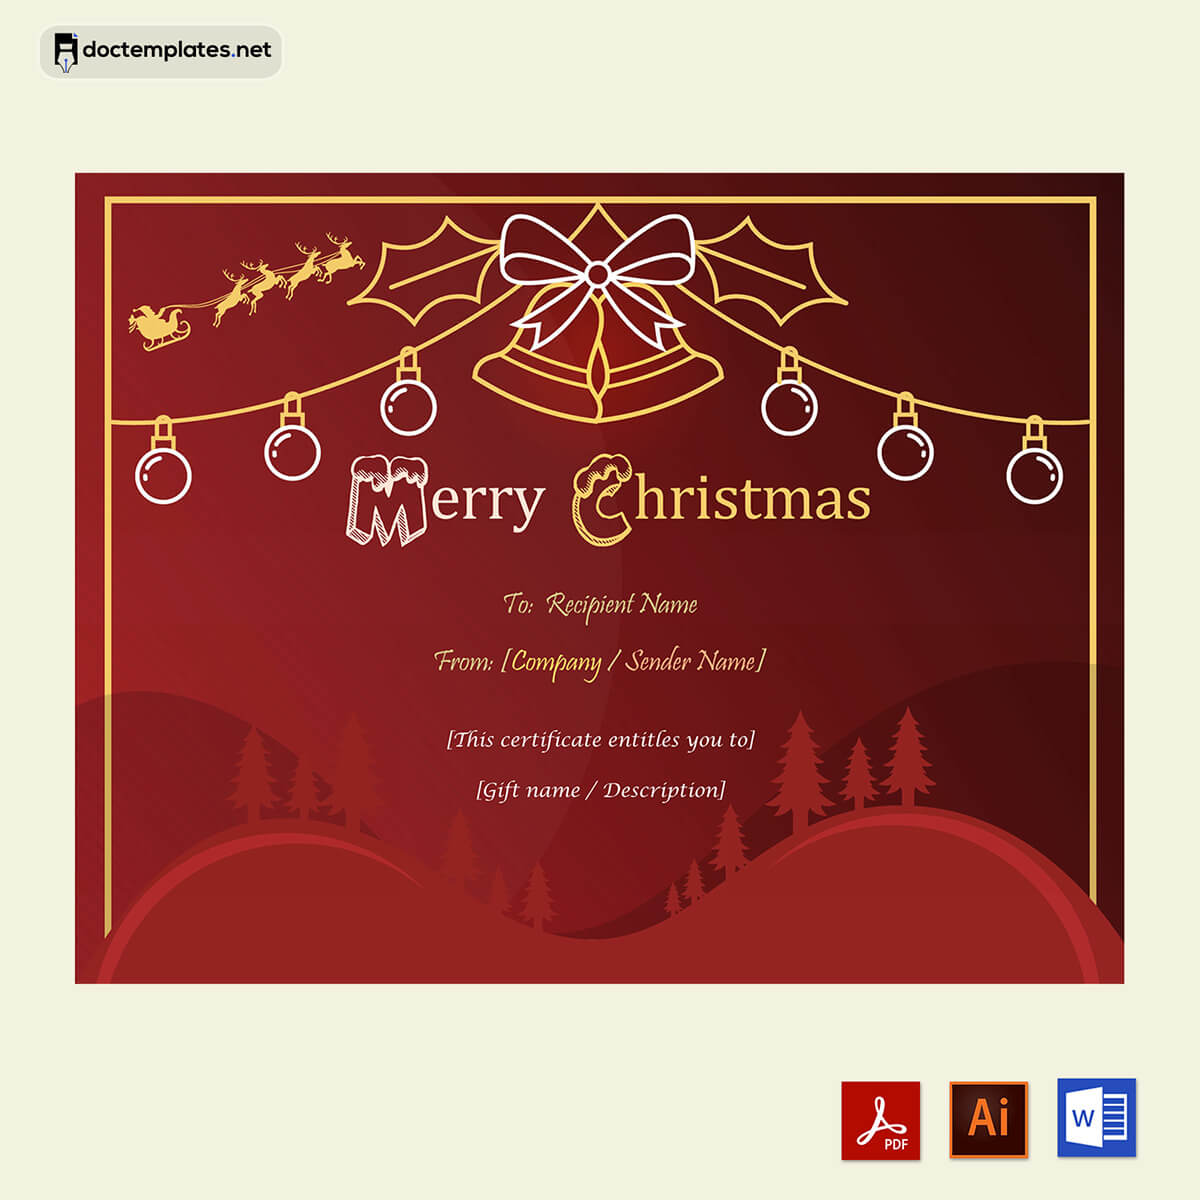 Image of Free holiday voucher template
Free holiday voucher template
01